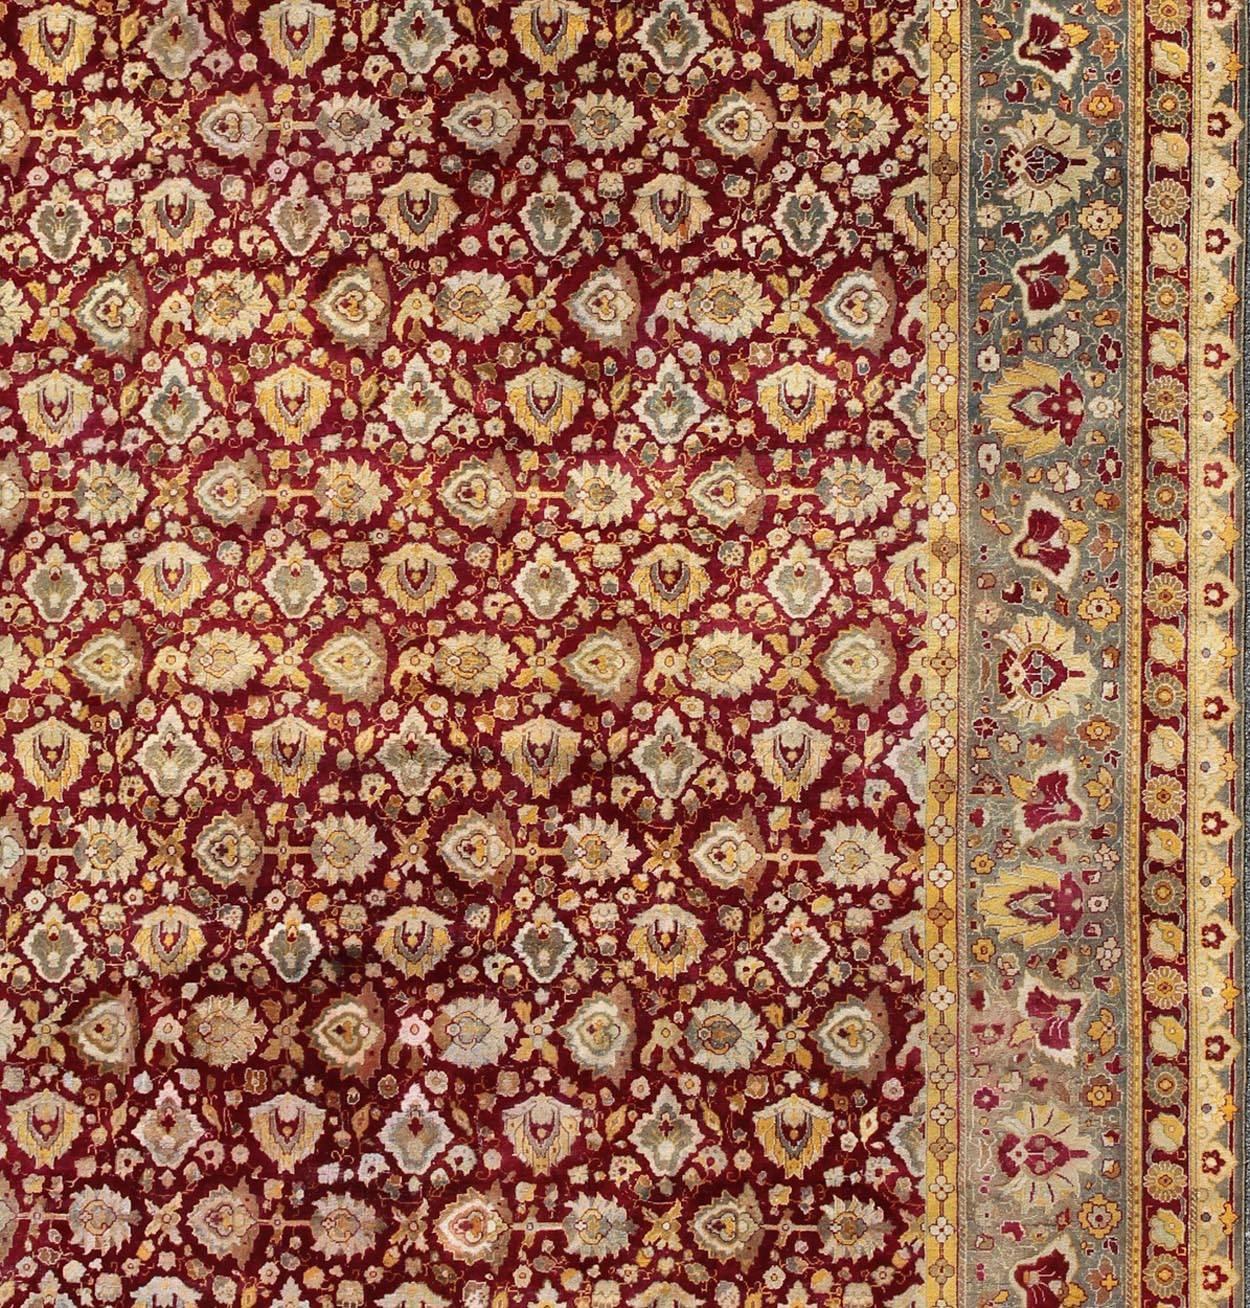 Antique Hand Knotted Indian Agra Rug Maroon Red Background and Gray Green Border In Good Condition For Sale In Atlanta, GA